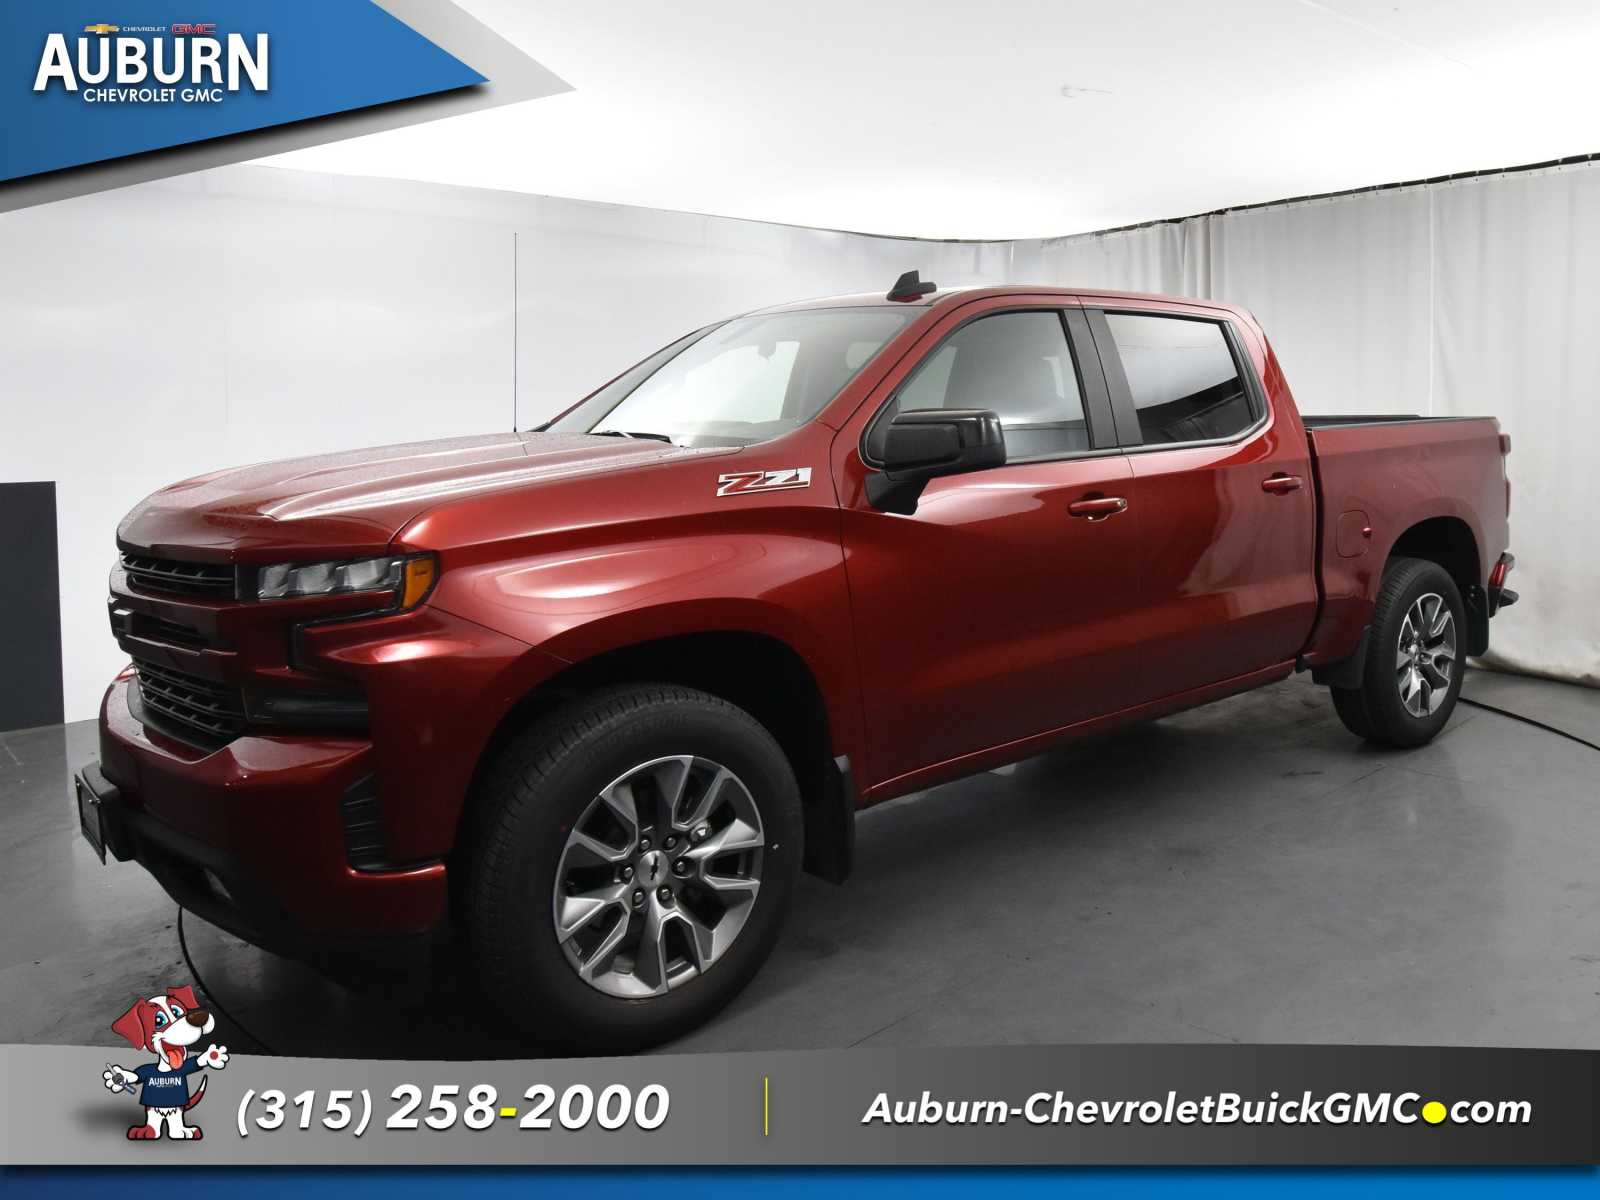 Used 2021 Chevrolet Silverado 1500 RST with VIN 1GCUYEEDXMZ296827 for sale in Auburn, NY